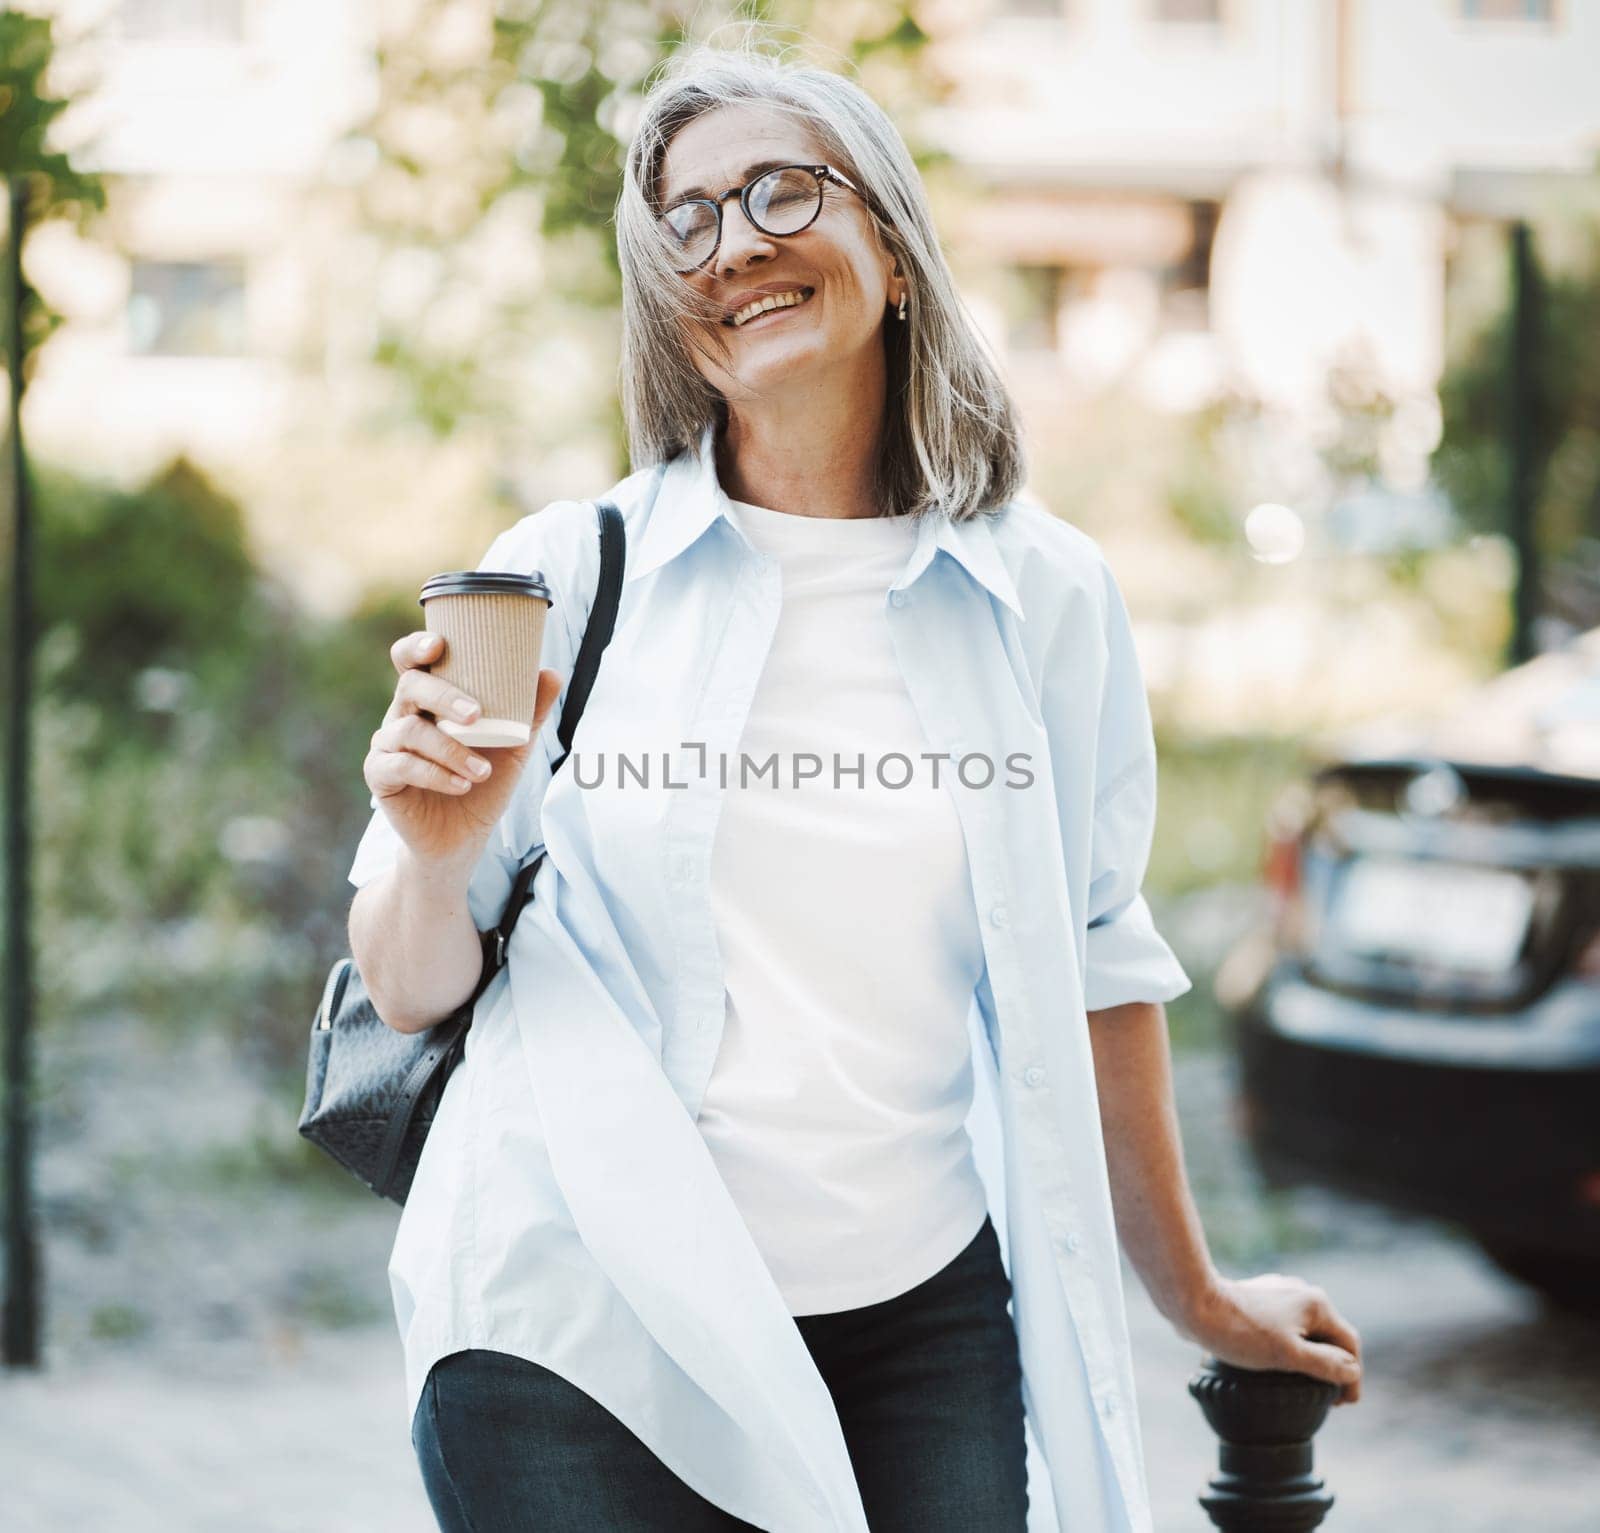 Woman in good mood, radiating happiness and contentment with life. The image features lady standing on a street, exuding joyful and carefree demeanor. . High quality photo